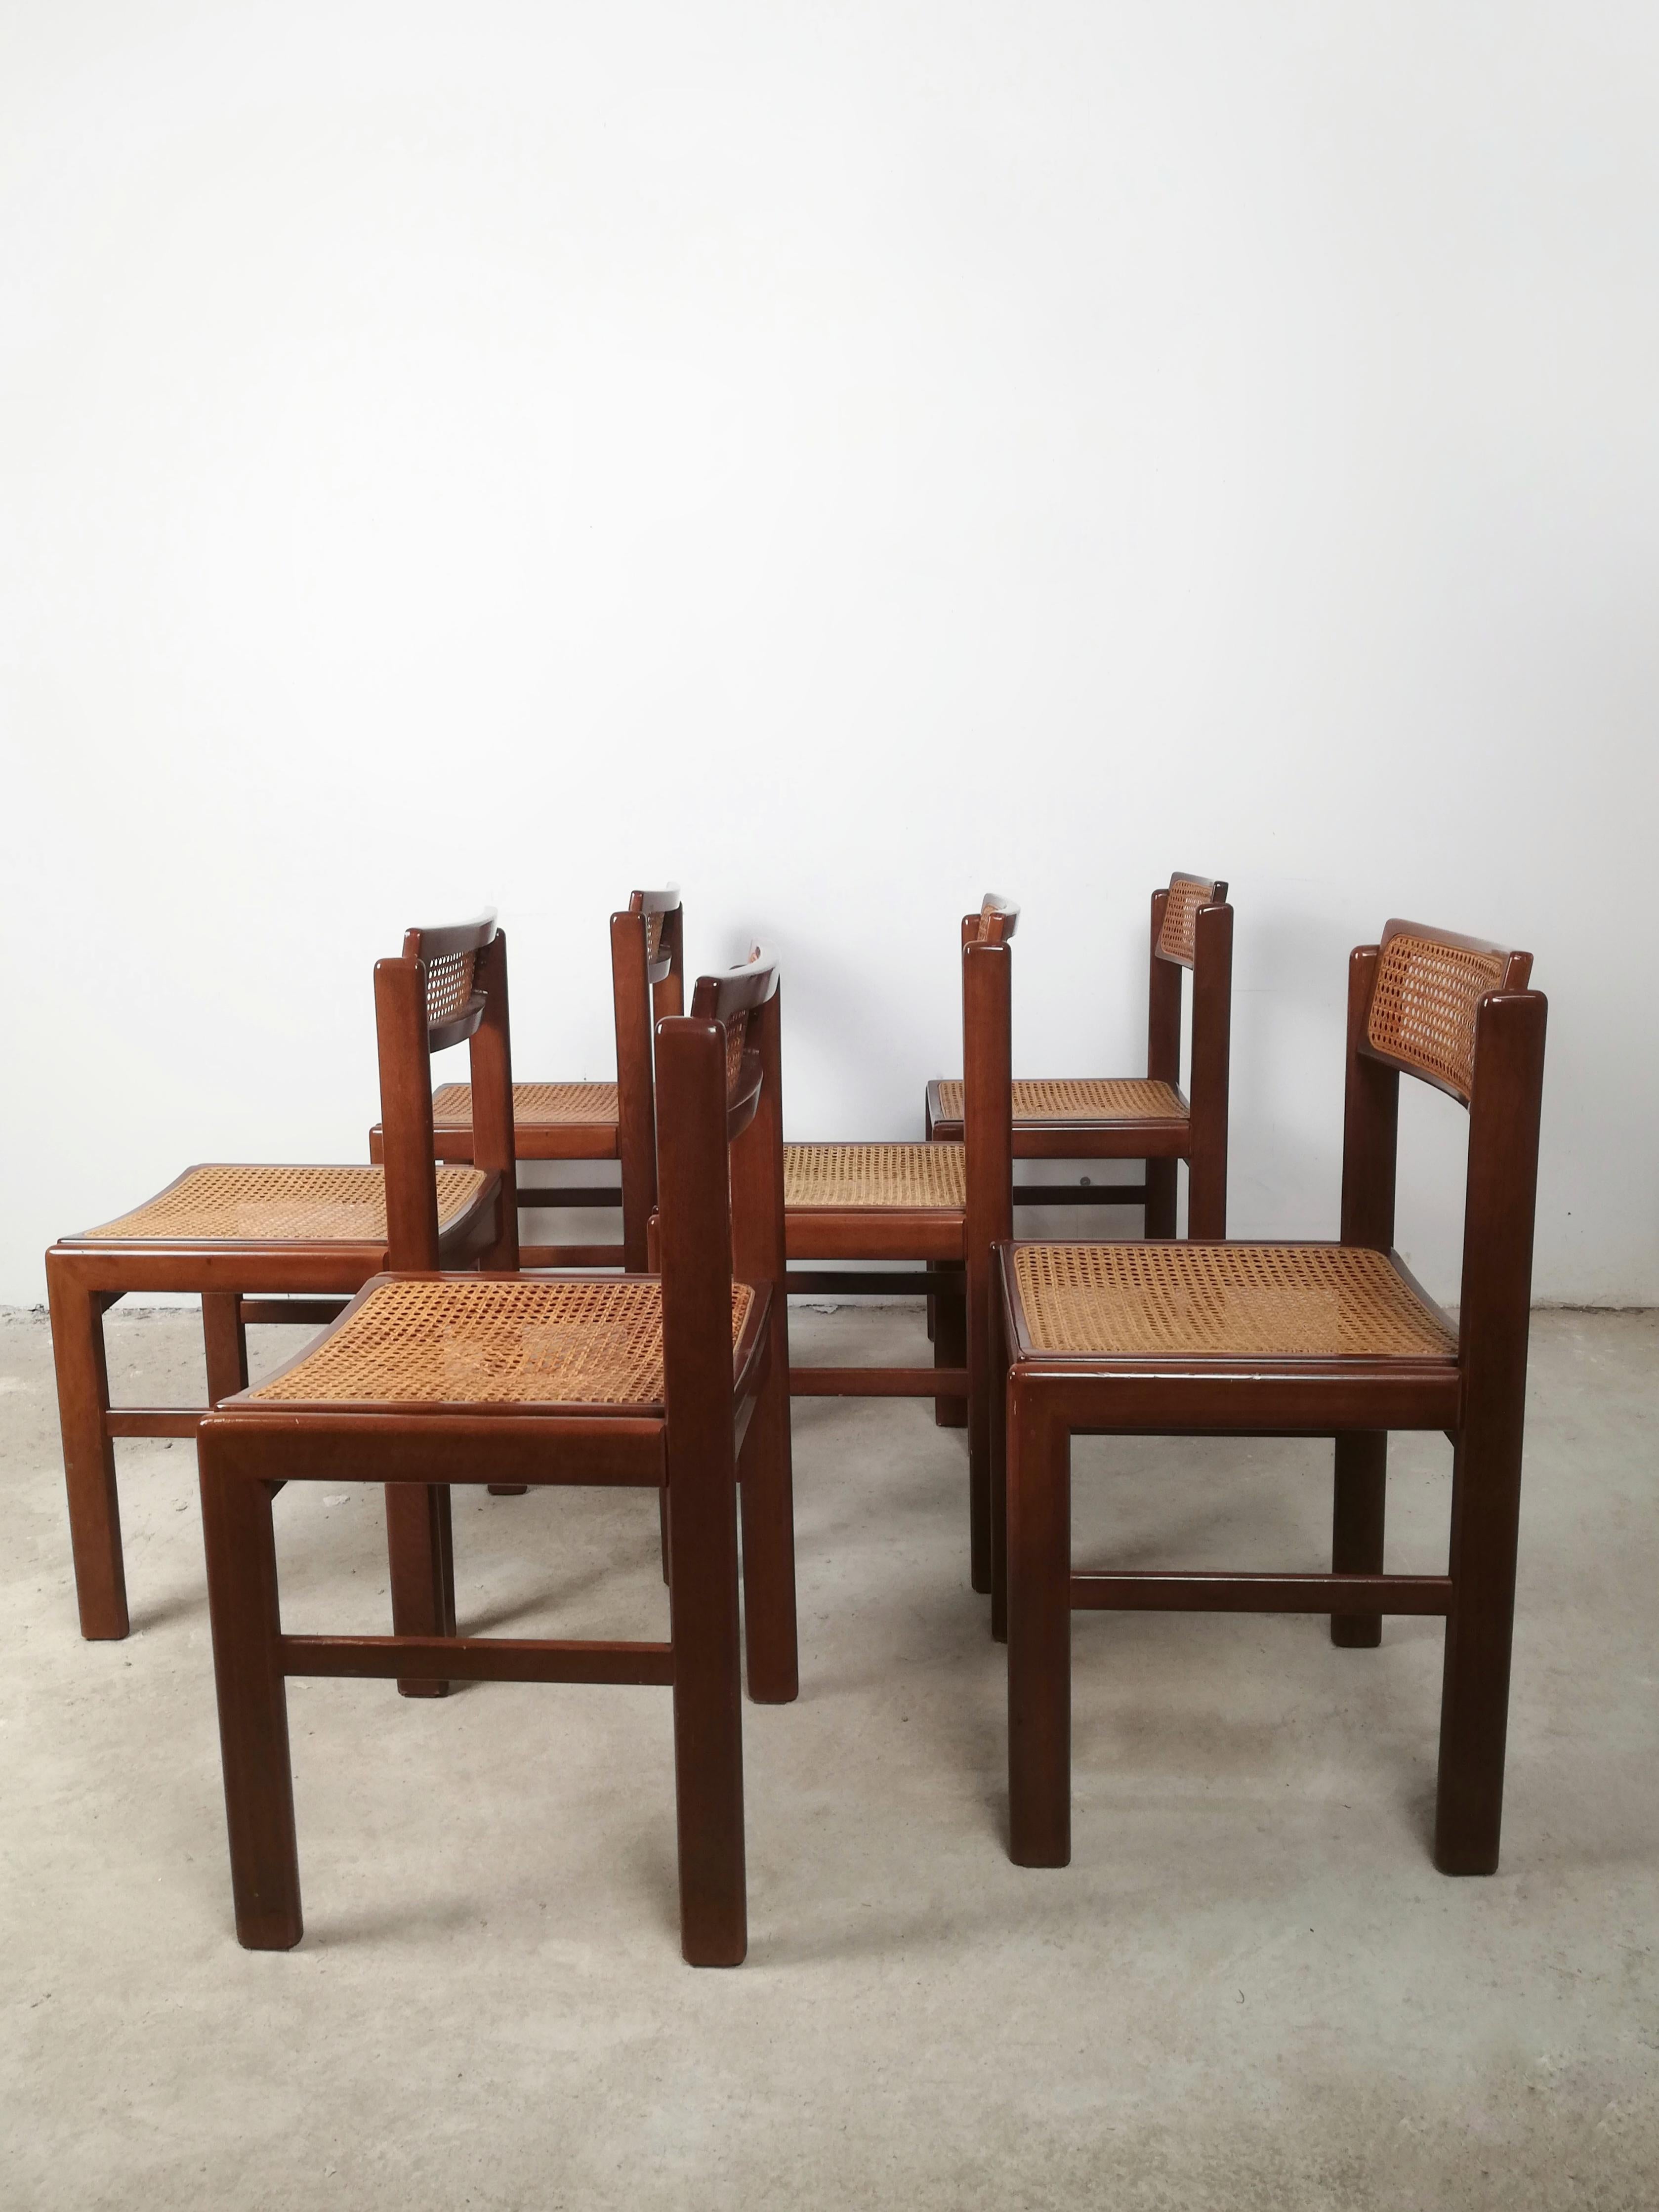 20th Century Italian Vintage Chairs in Walnut and Natural Rattan, Italy 1970s